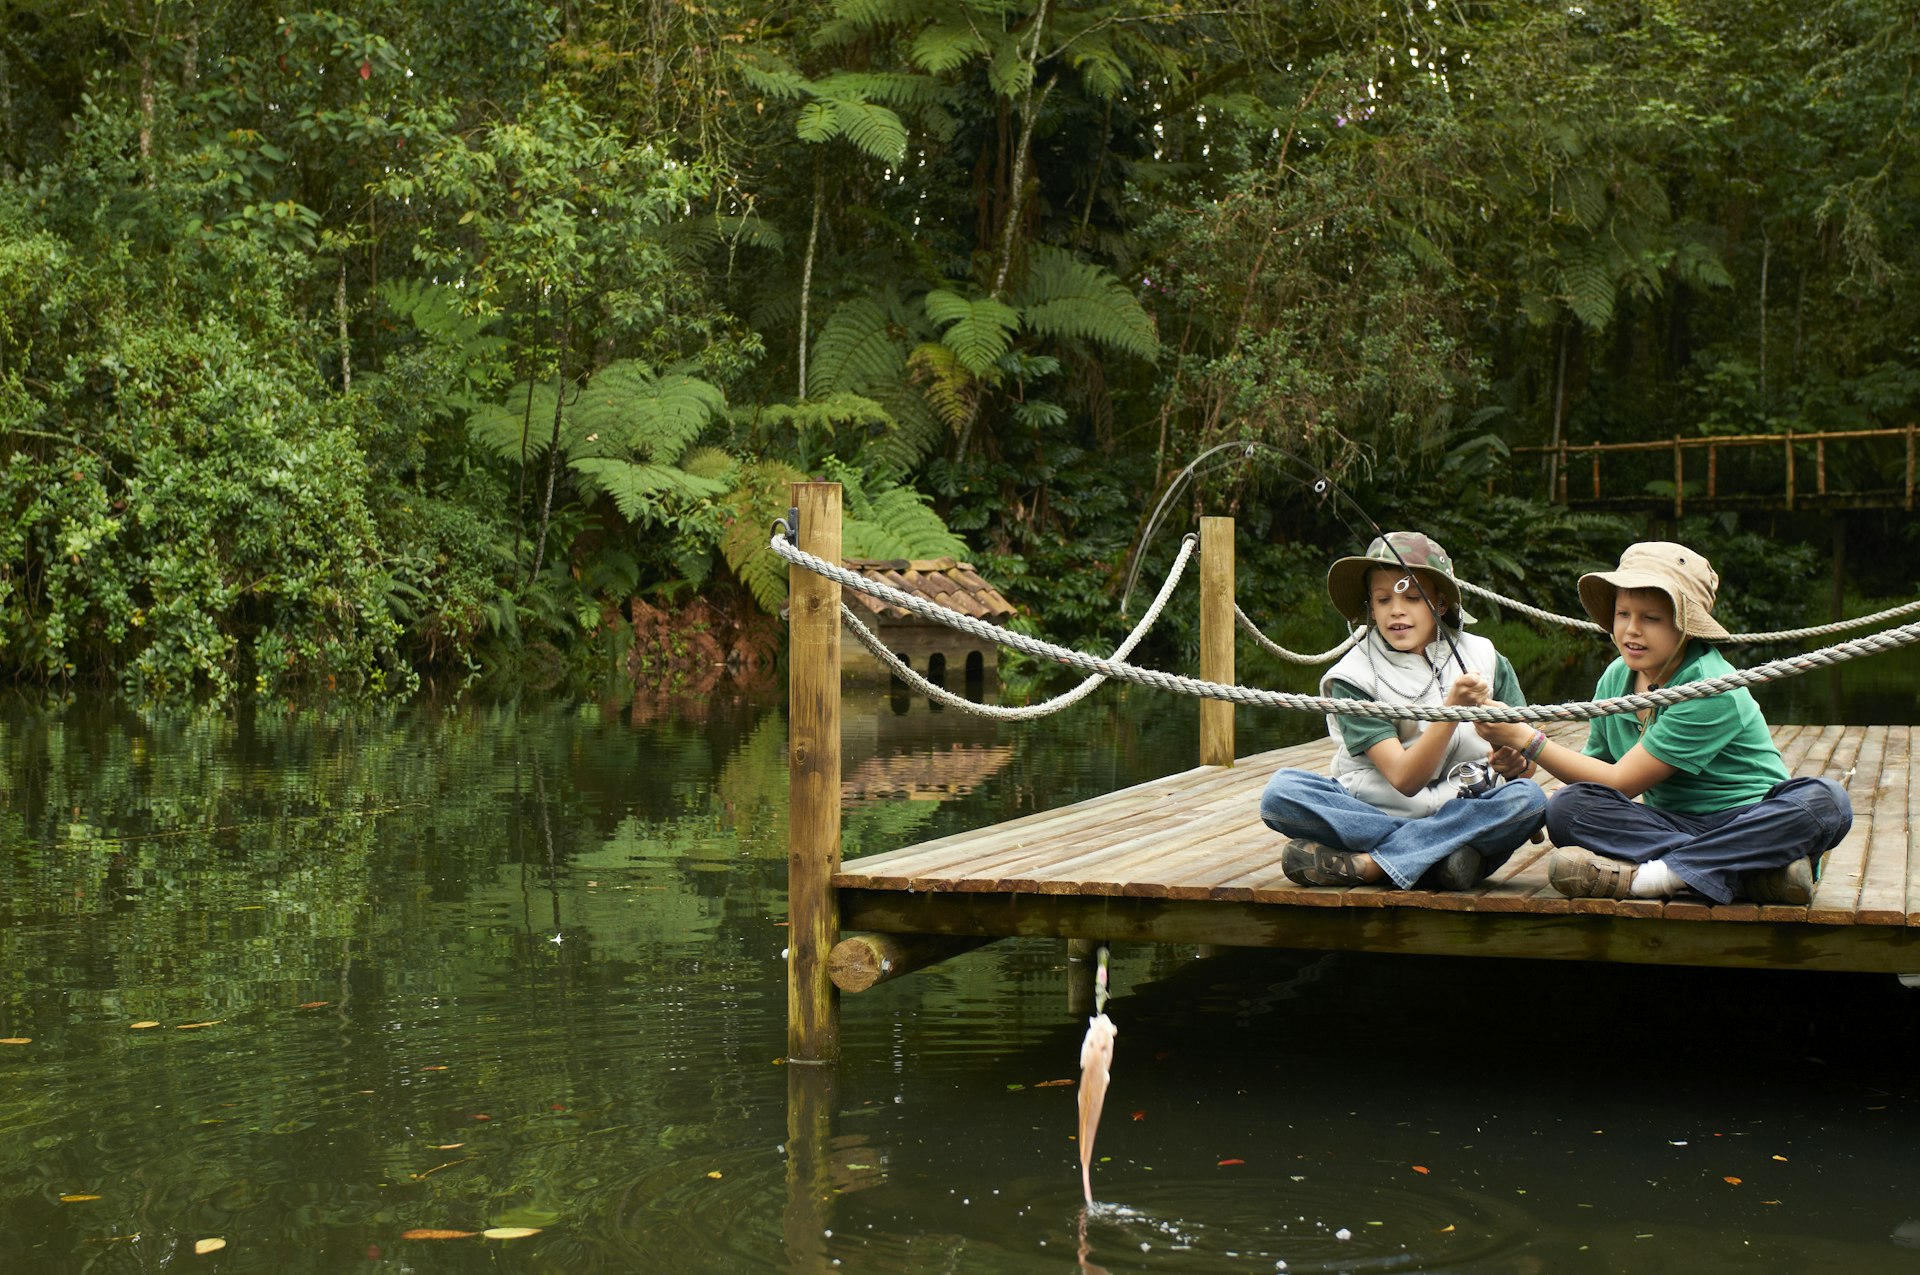 Two young boys fish on a pier in a forested area of Colombia